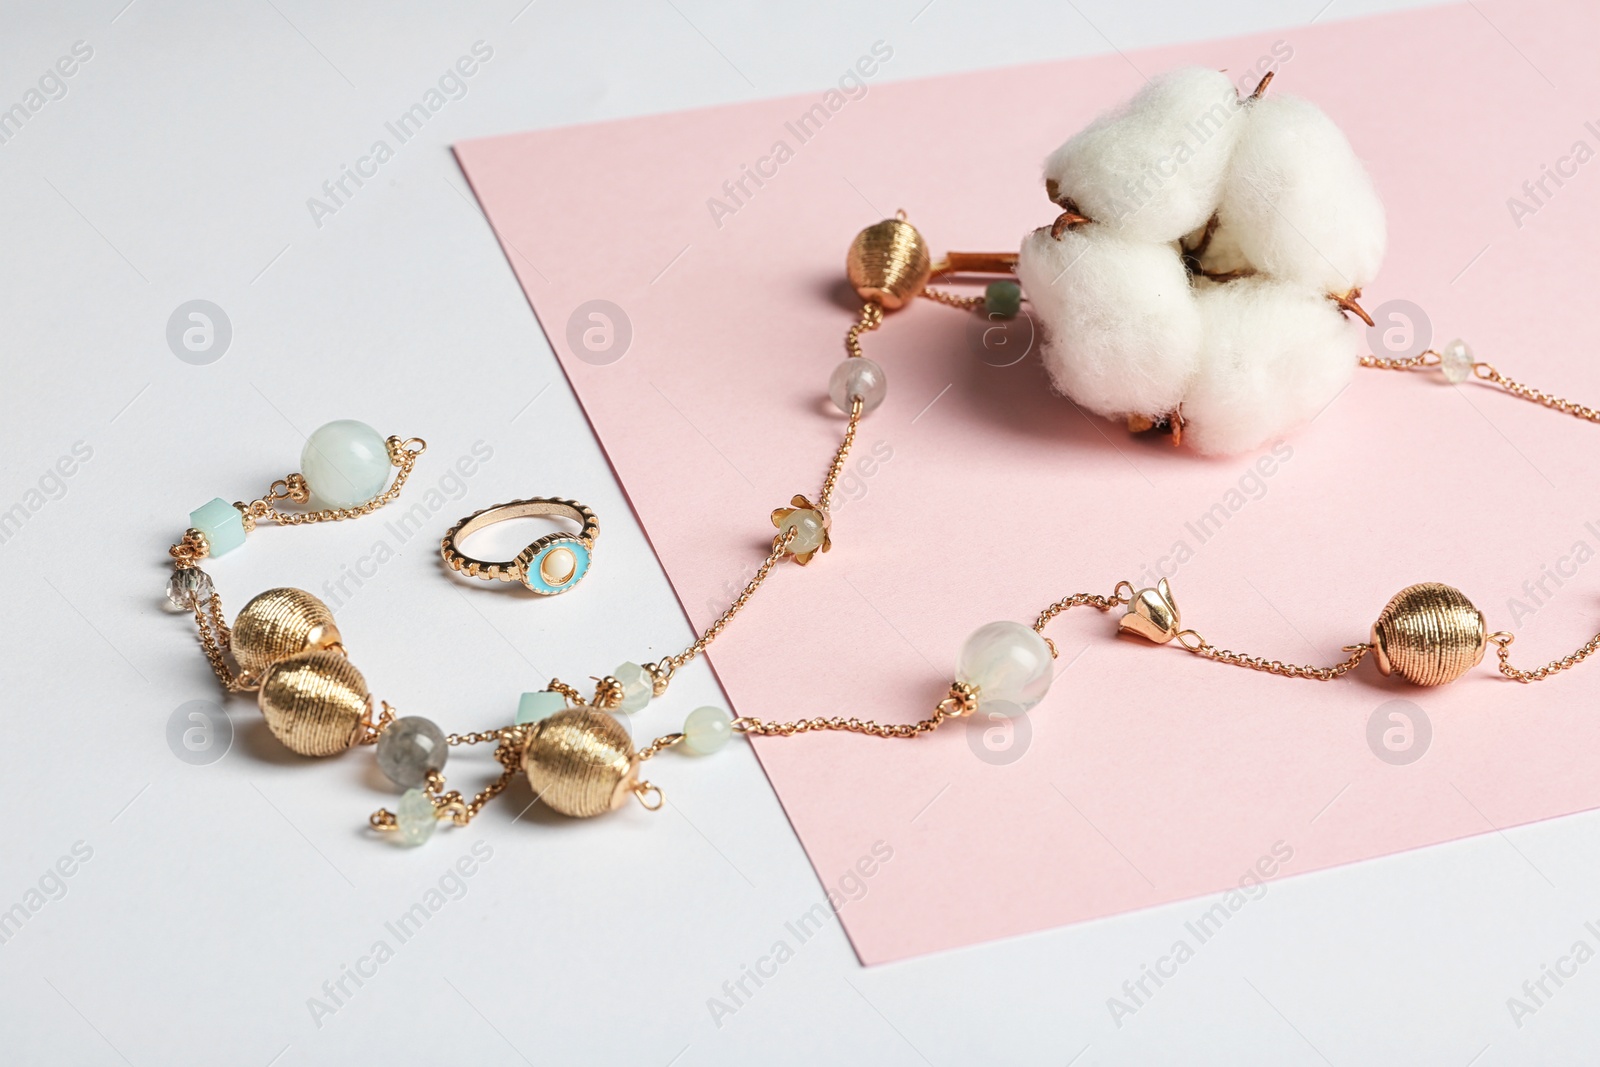 Photo of Elegant jewelry and cotton flower on color background